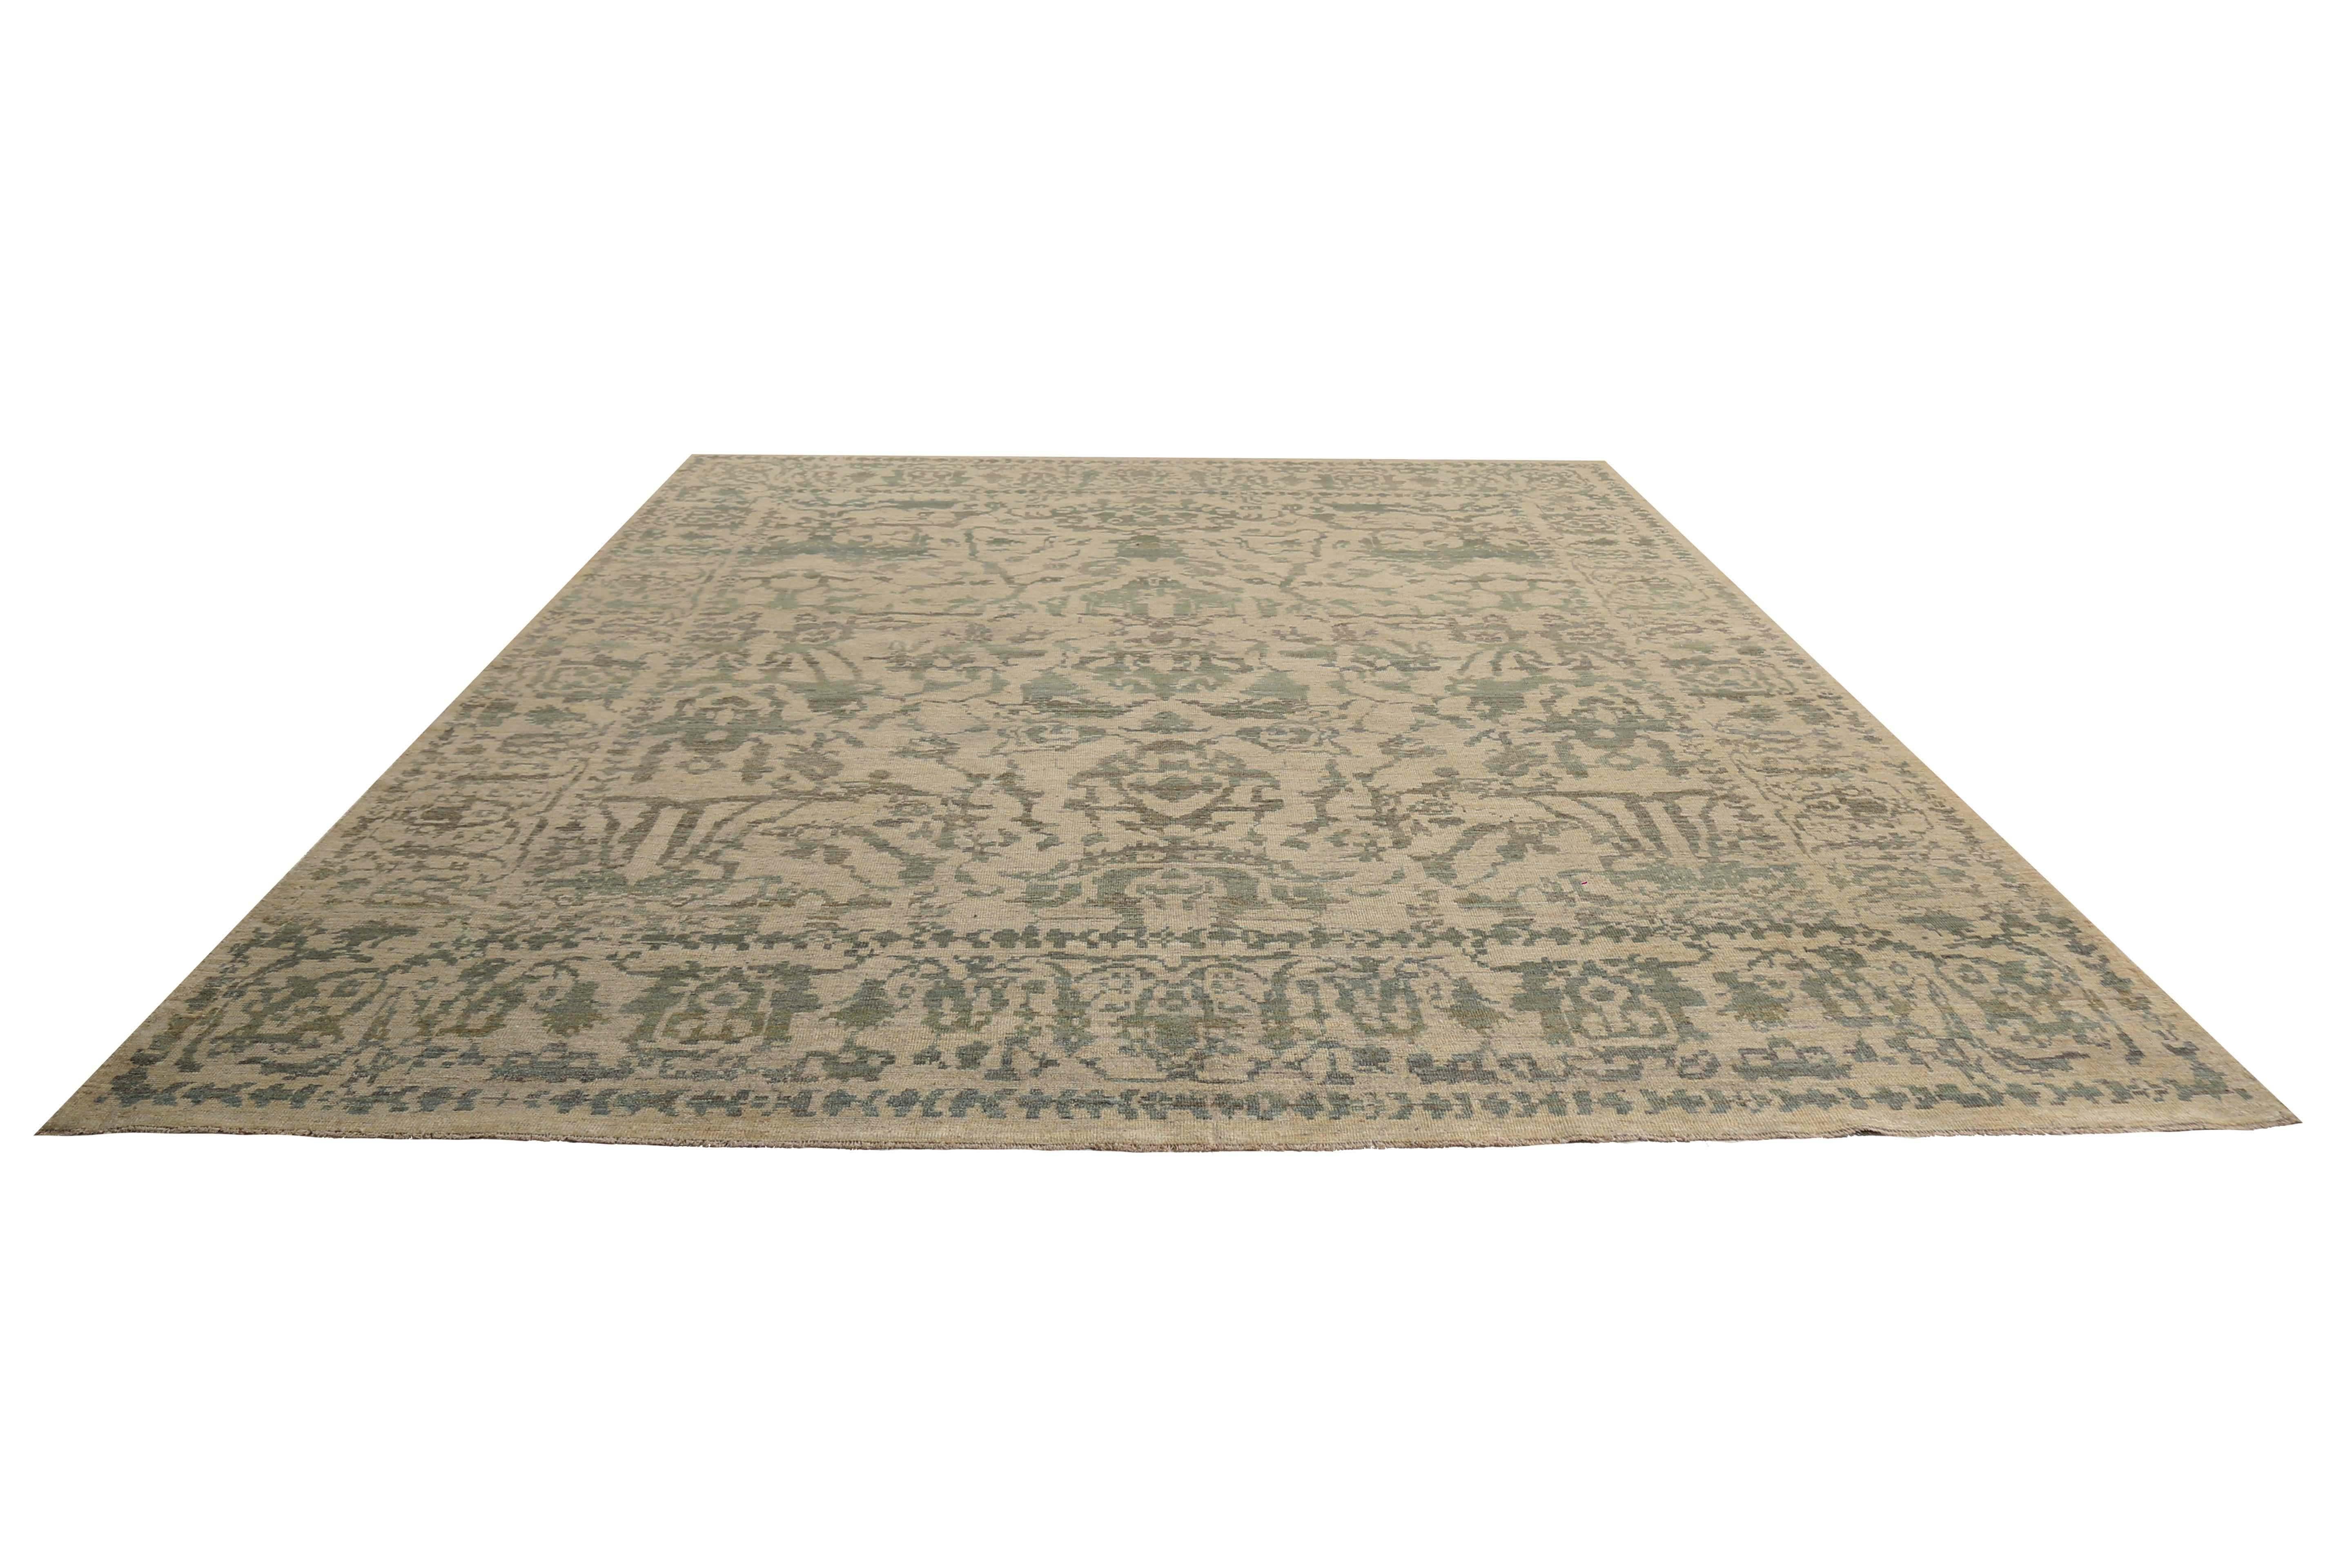 Introducing our stunning handmade Turkish Sultanabad Rug, perfect for adding a touch of elegance and modernity to any room. Measuring 10'2'' x 12'8'', this beautiful rug features a beige background with a captivating design composed of blue, green,